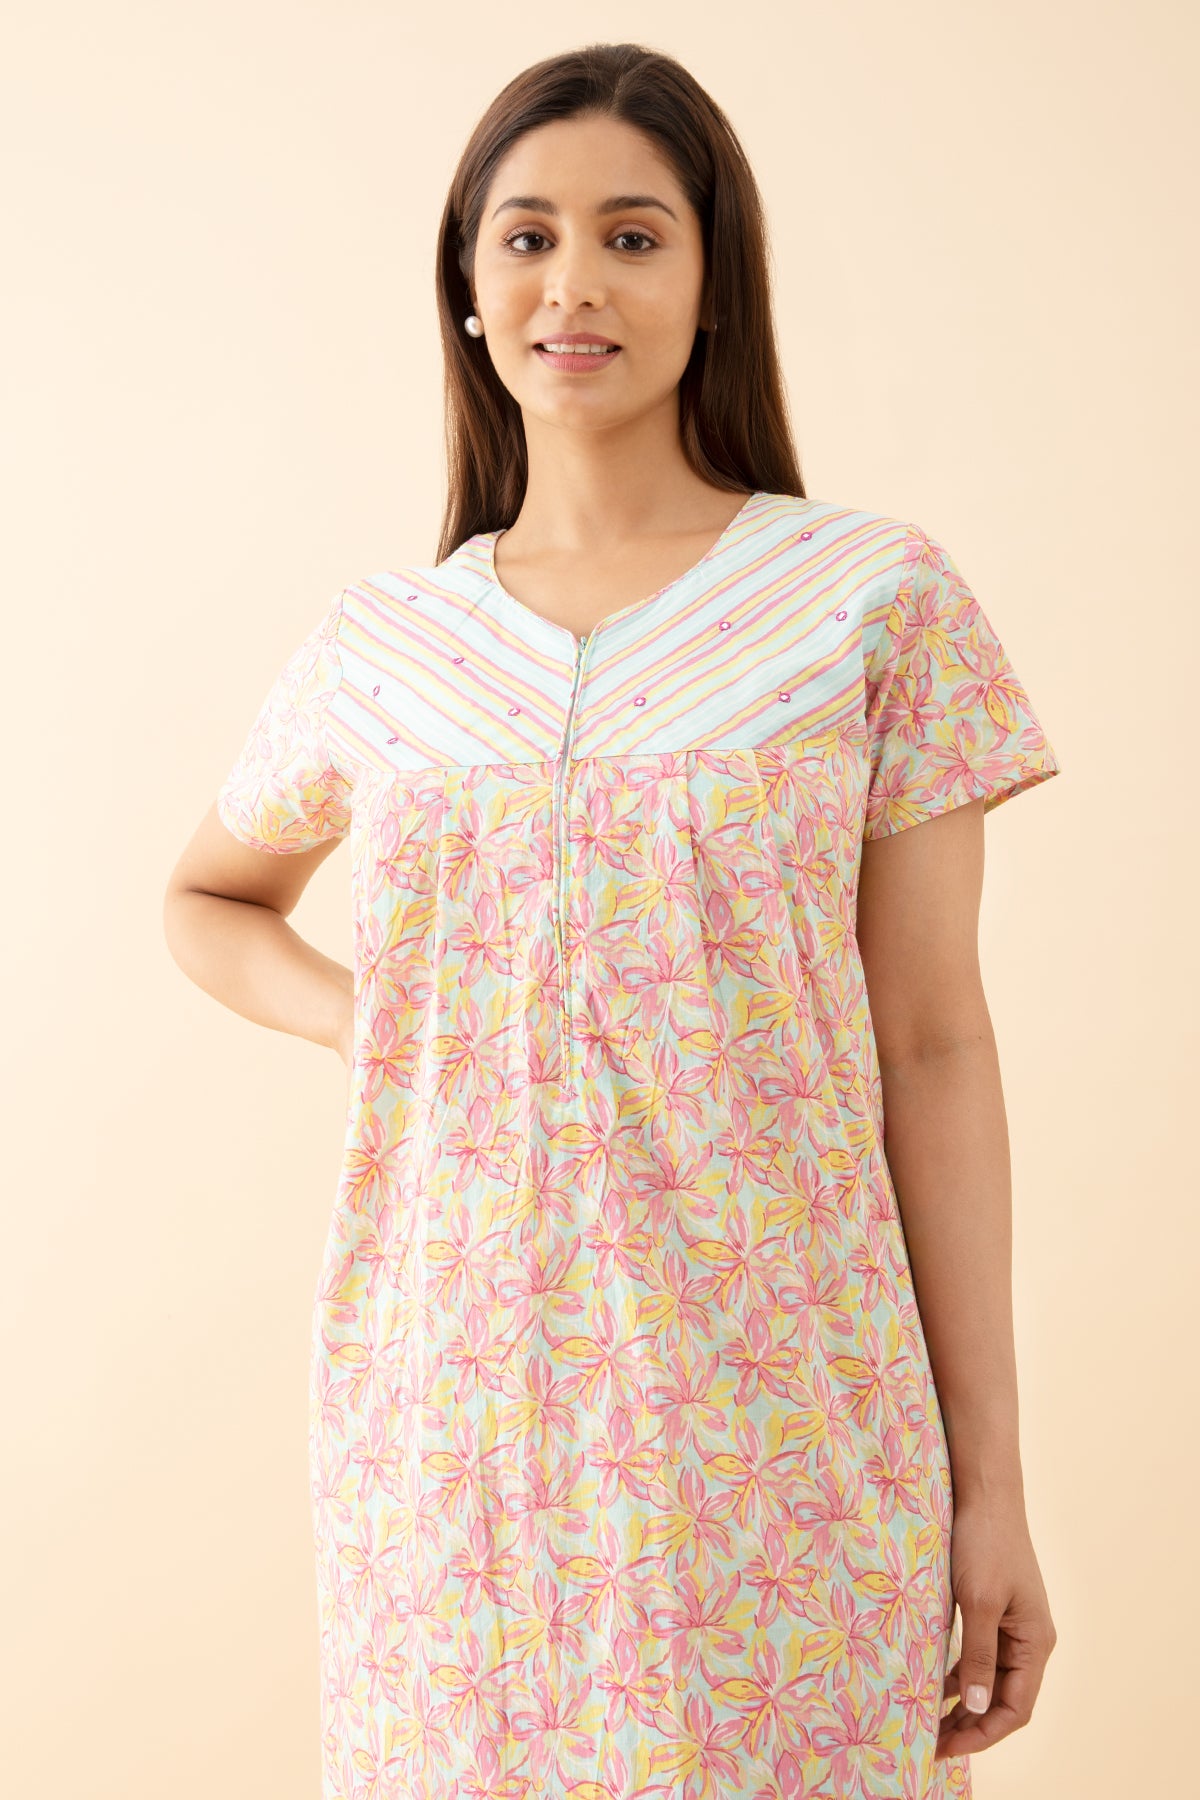 Buttercup Floral Printed Nighty with Stripes Printed Yoke - Blue